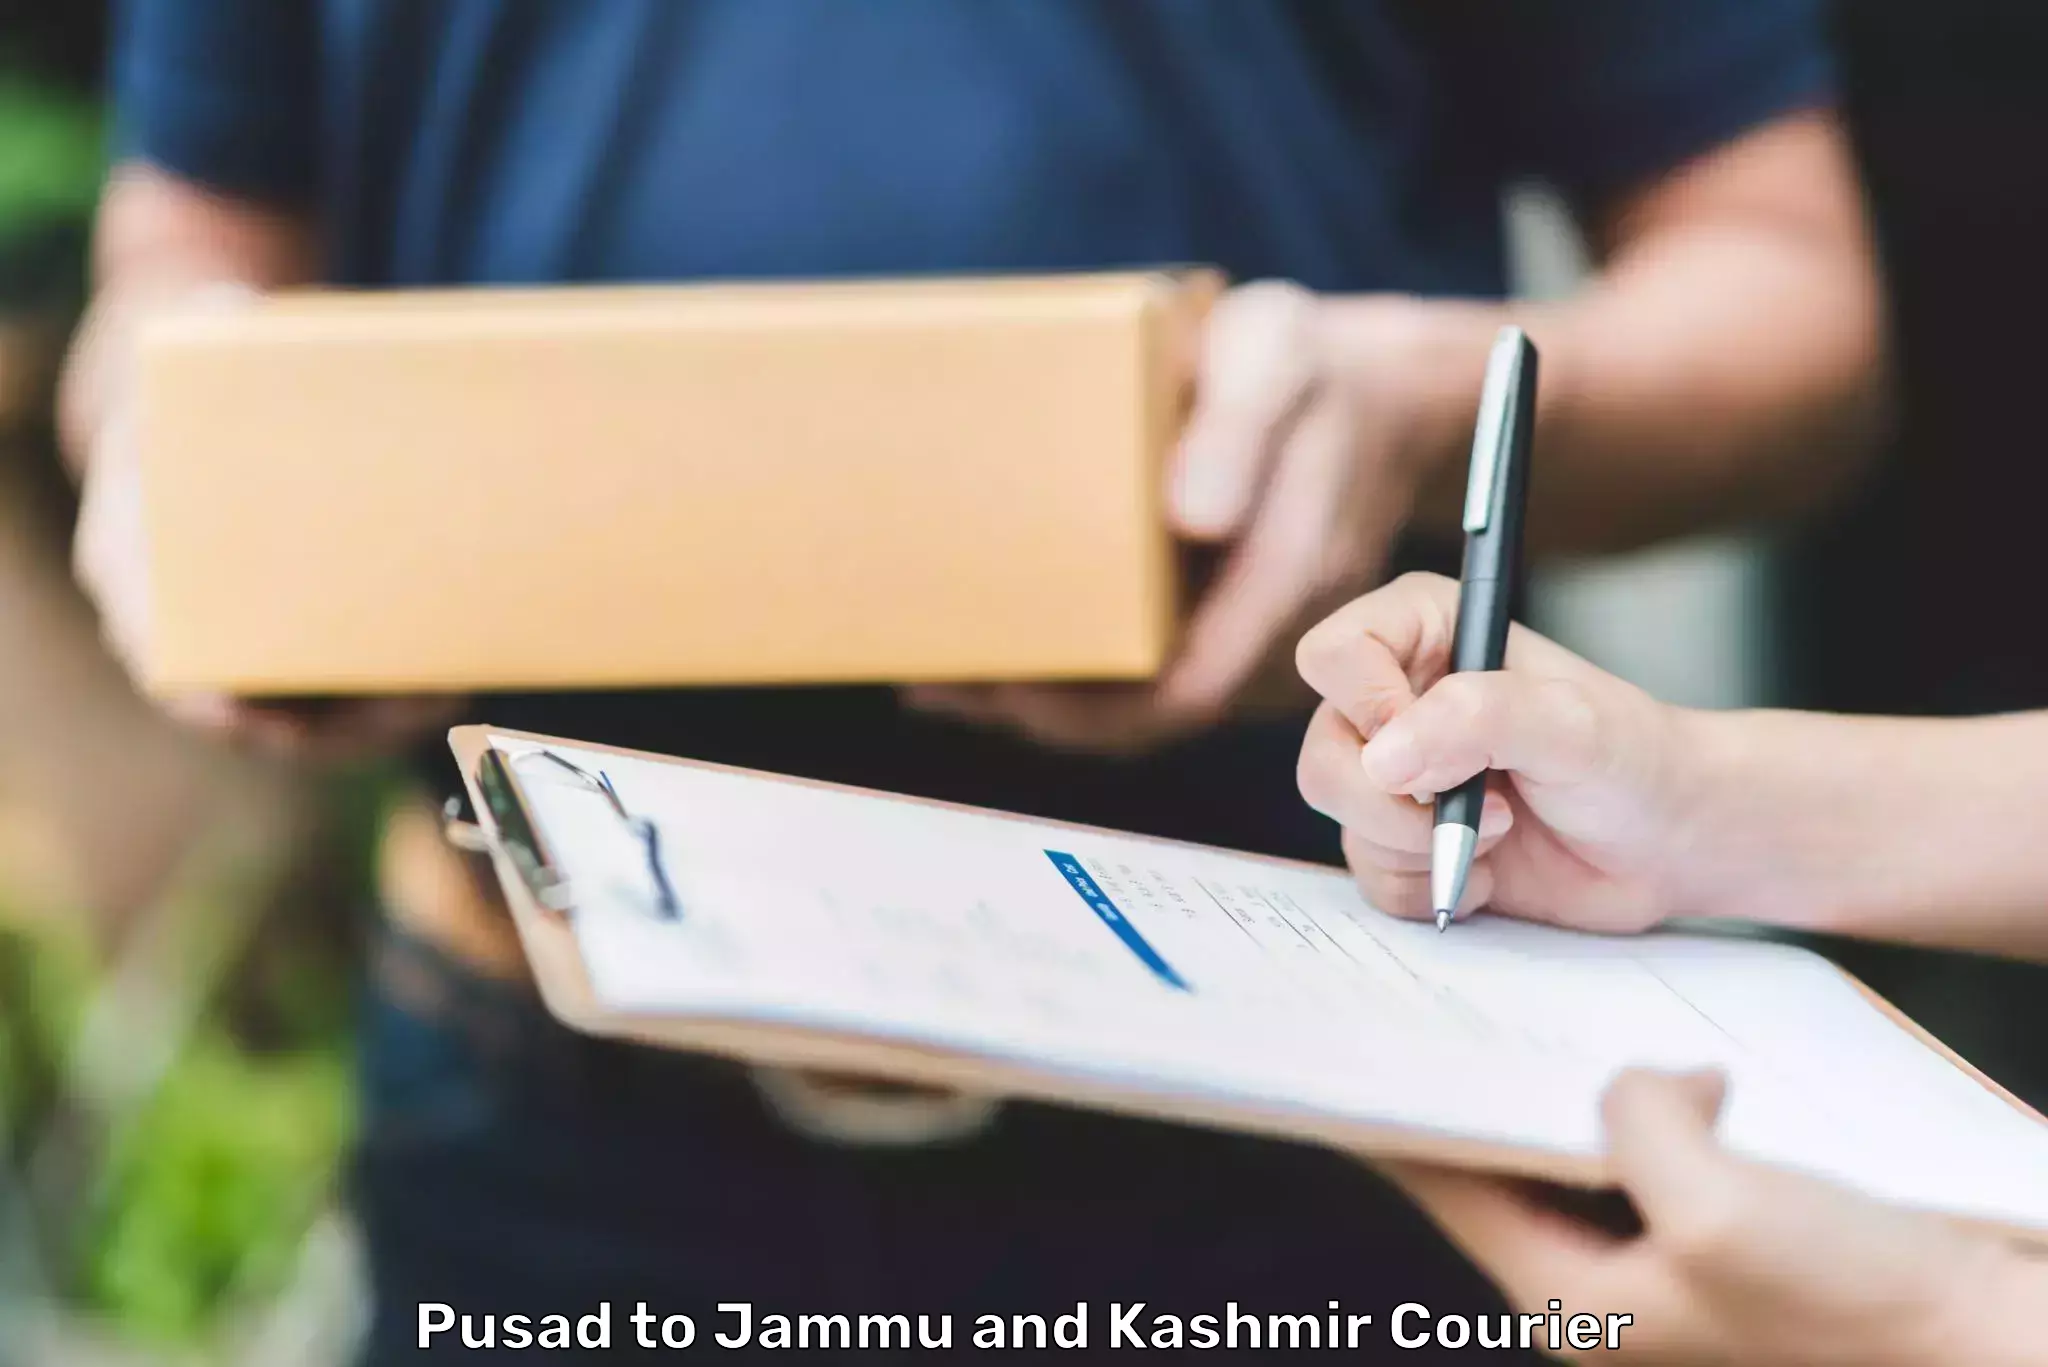 Courier service partnerships Pusad to Jakh